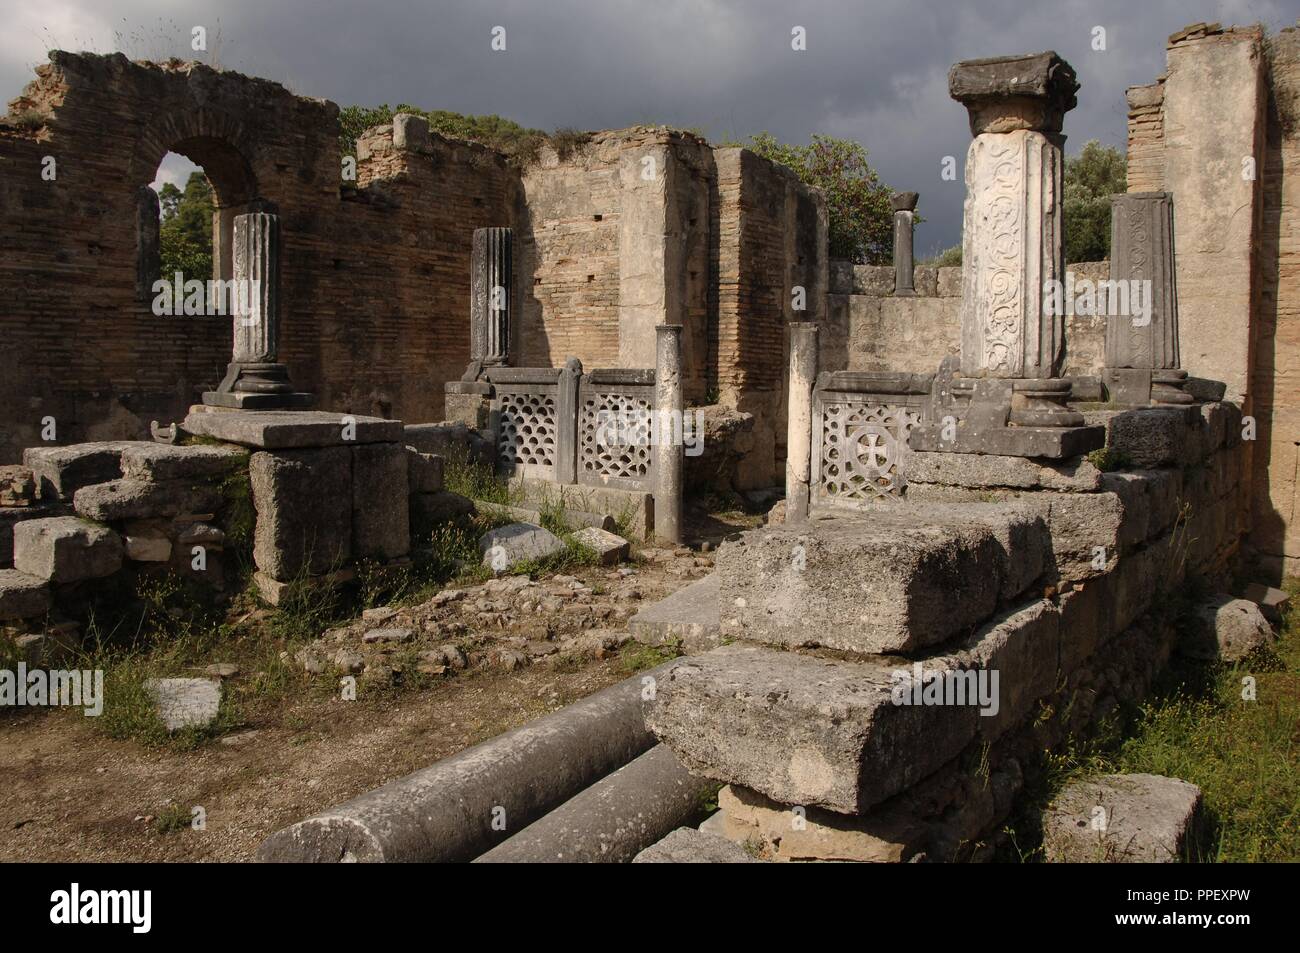 Greece. Olympia. Workshop of Pheidias. Rectangular building, ca. 430 BC. Where Pheidias constructed the famous cult statue of Zeus. The Buiding was later incoporated into a Byznatine church. Elis Region, Peloponnese. Stock Photo